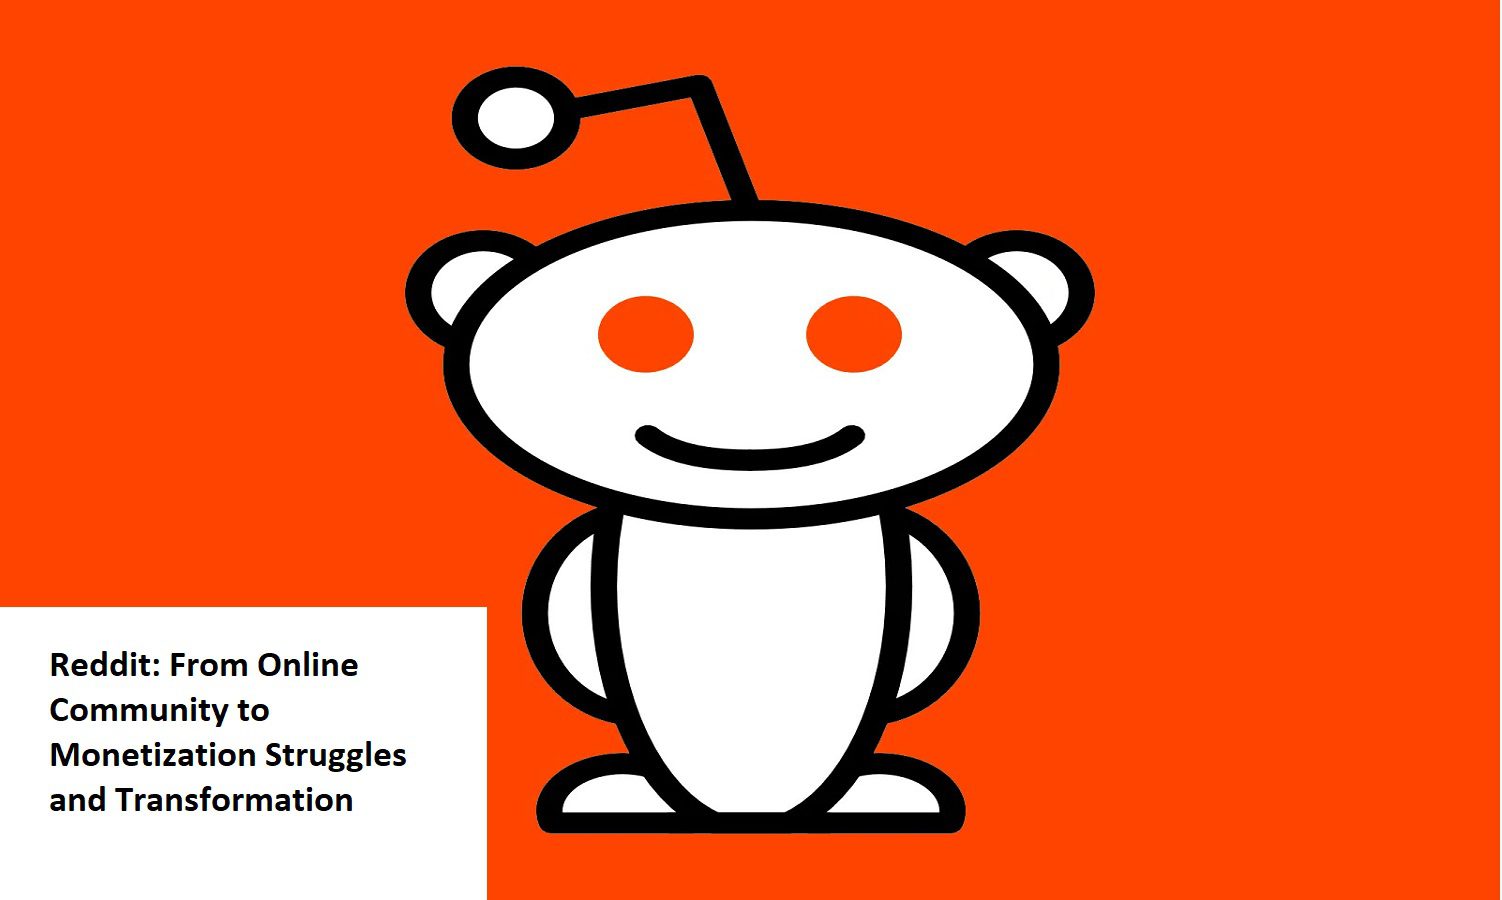 Reddit: From Online Community to Monetization Struggles and Transformation